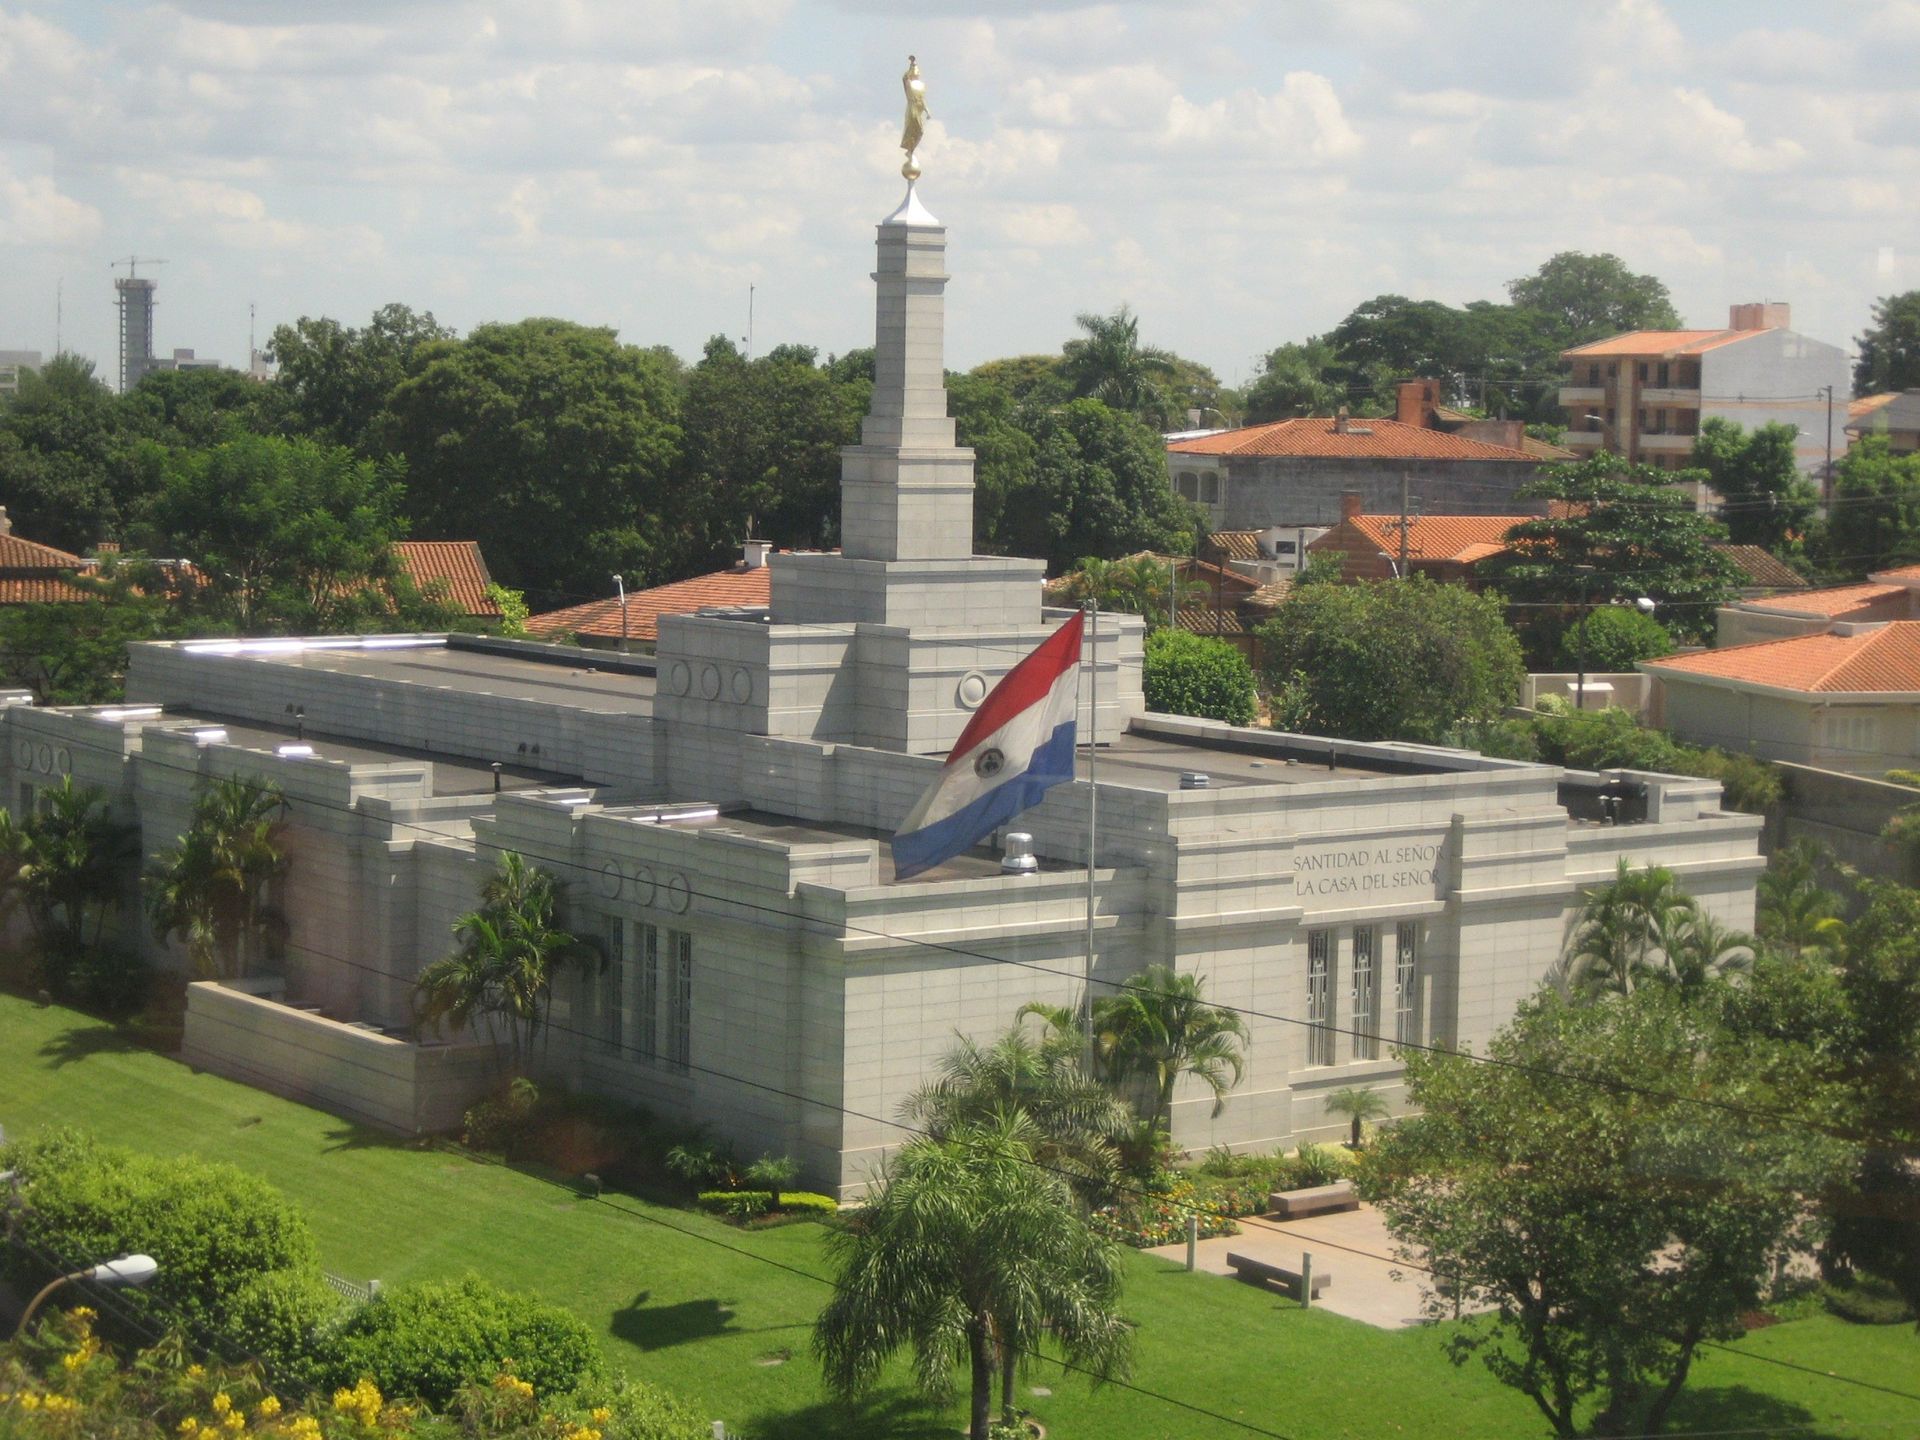 The Asunción Paraguay Temple situated in the local community, with the Paraguayan flag on display.